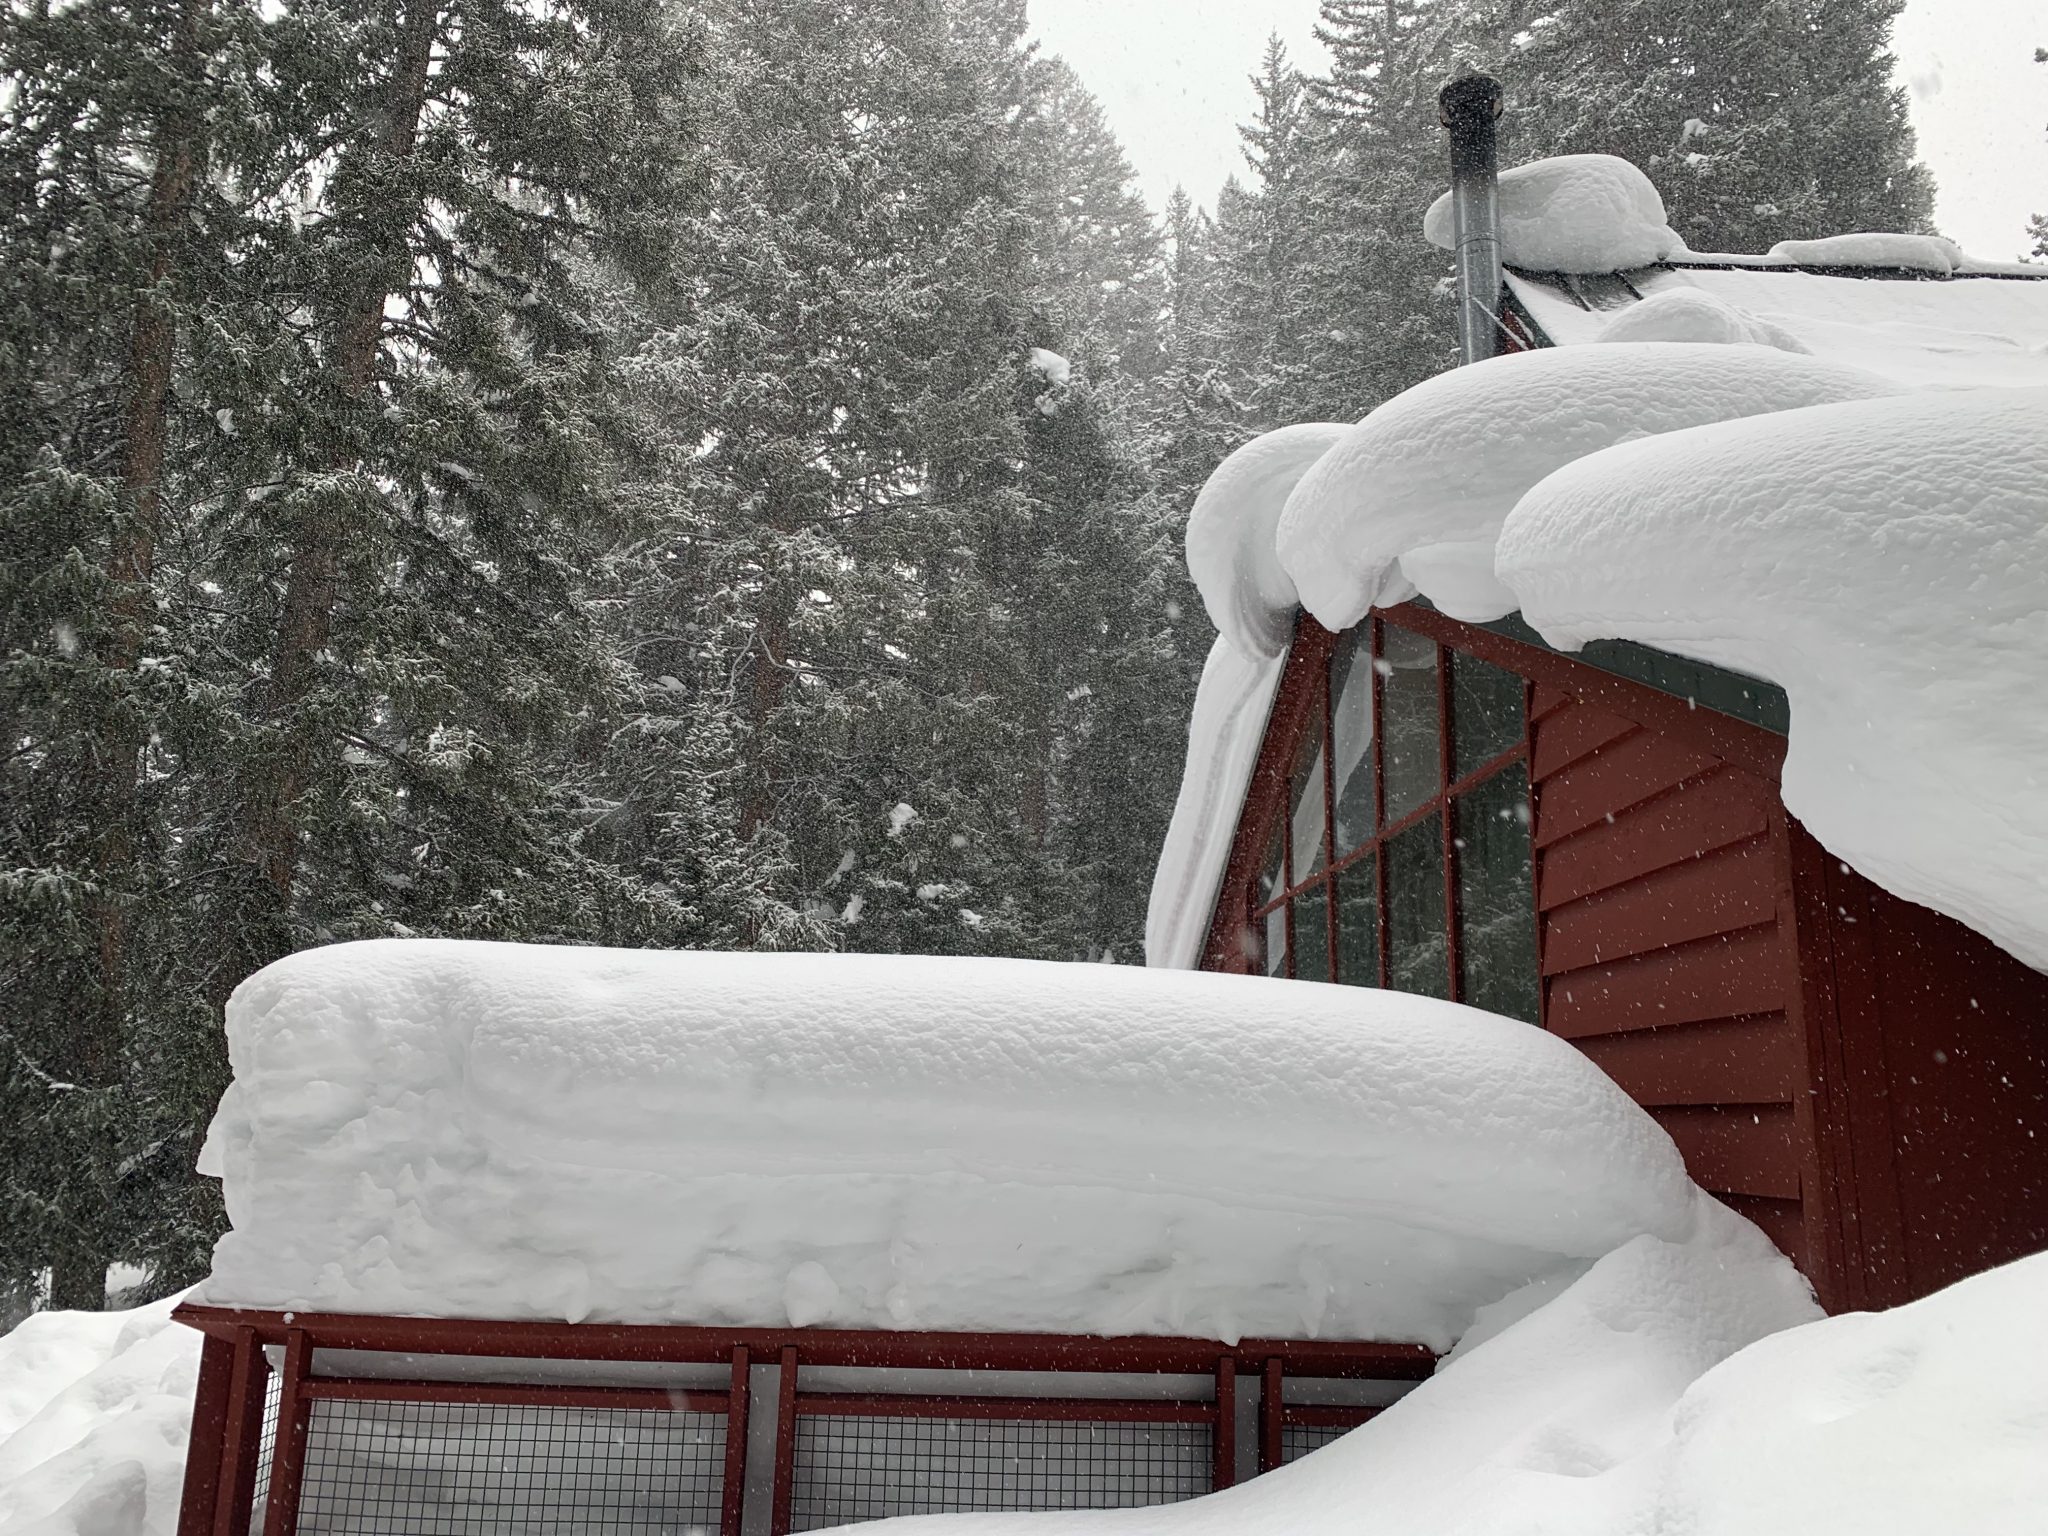 Nearly 15ft of snow resting on Camp Tuttle's iconic lodge back deck